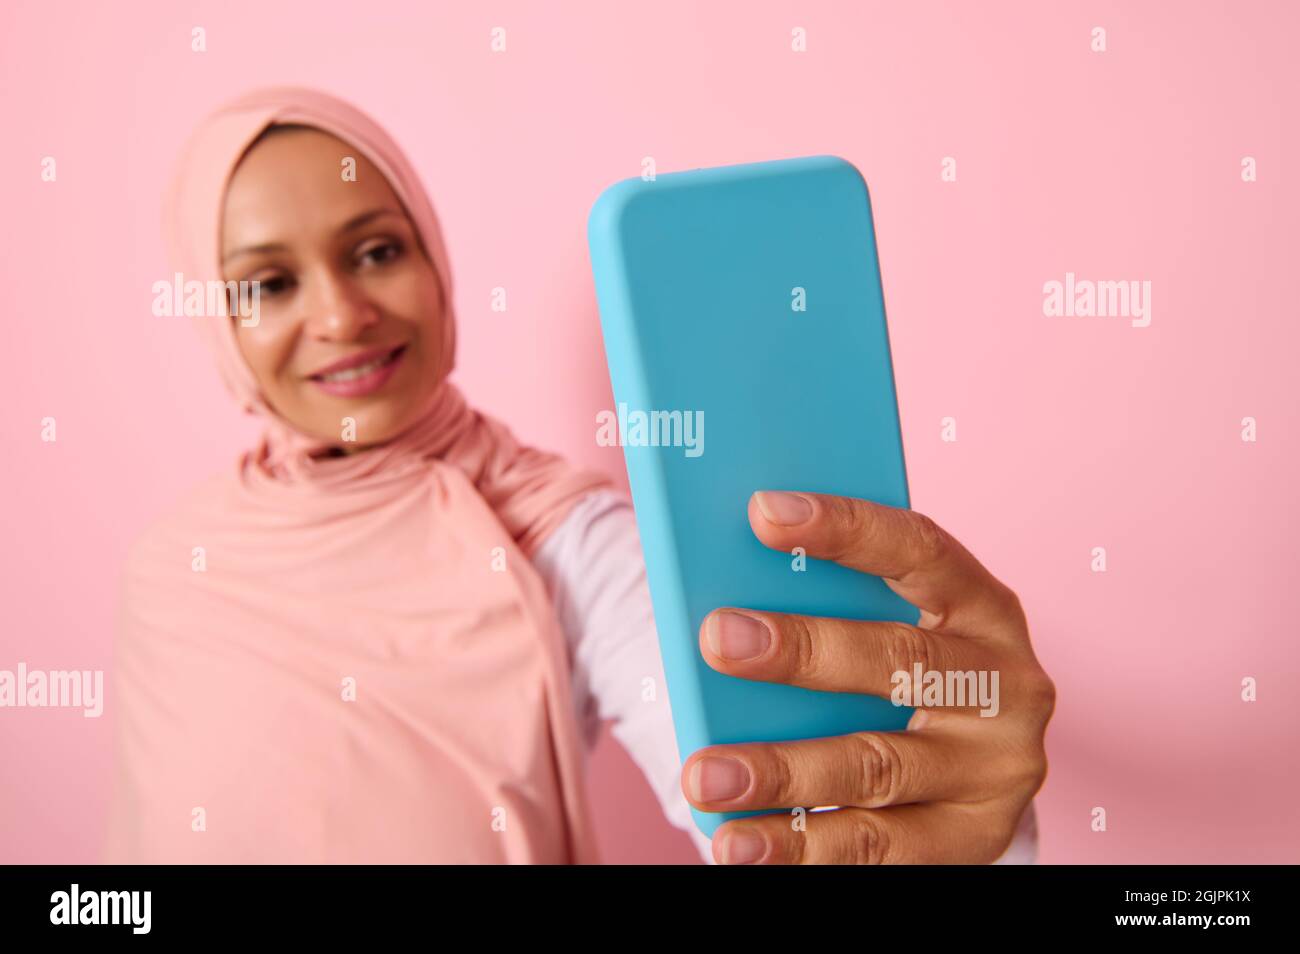 Soft focus on the smartphone in blue cover in outstretched arms of Arab Muslim woman wearing traditional religious islamic outfit, pink hijab,and smil Stock Photo